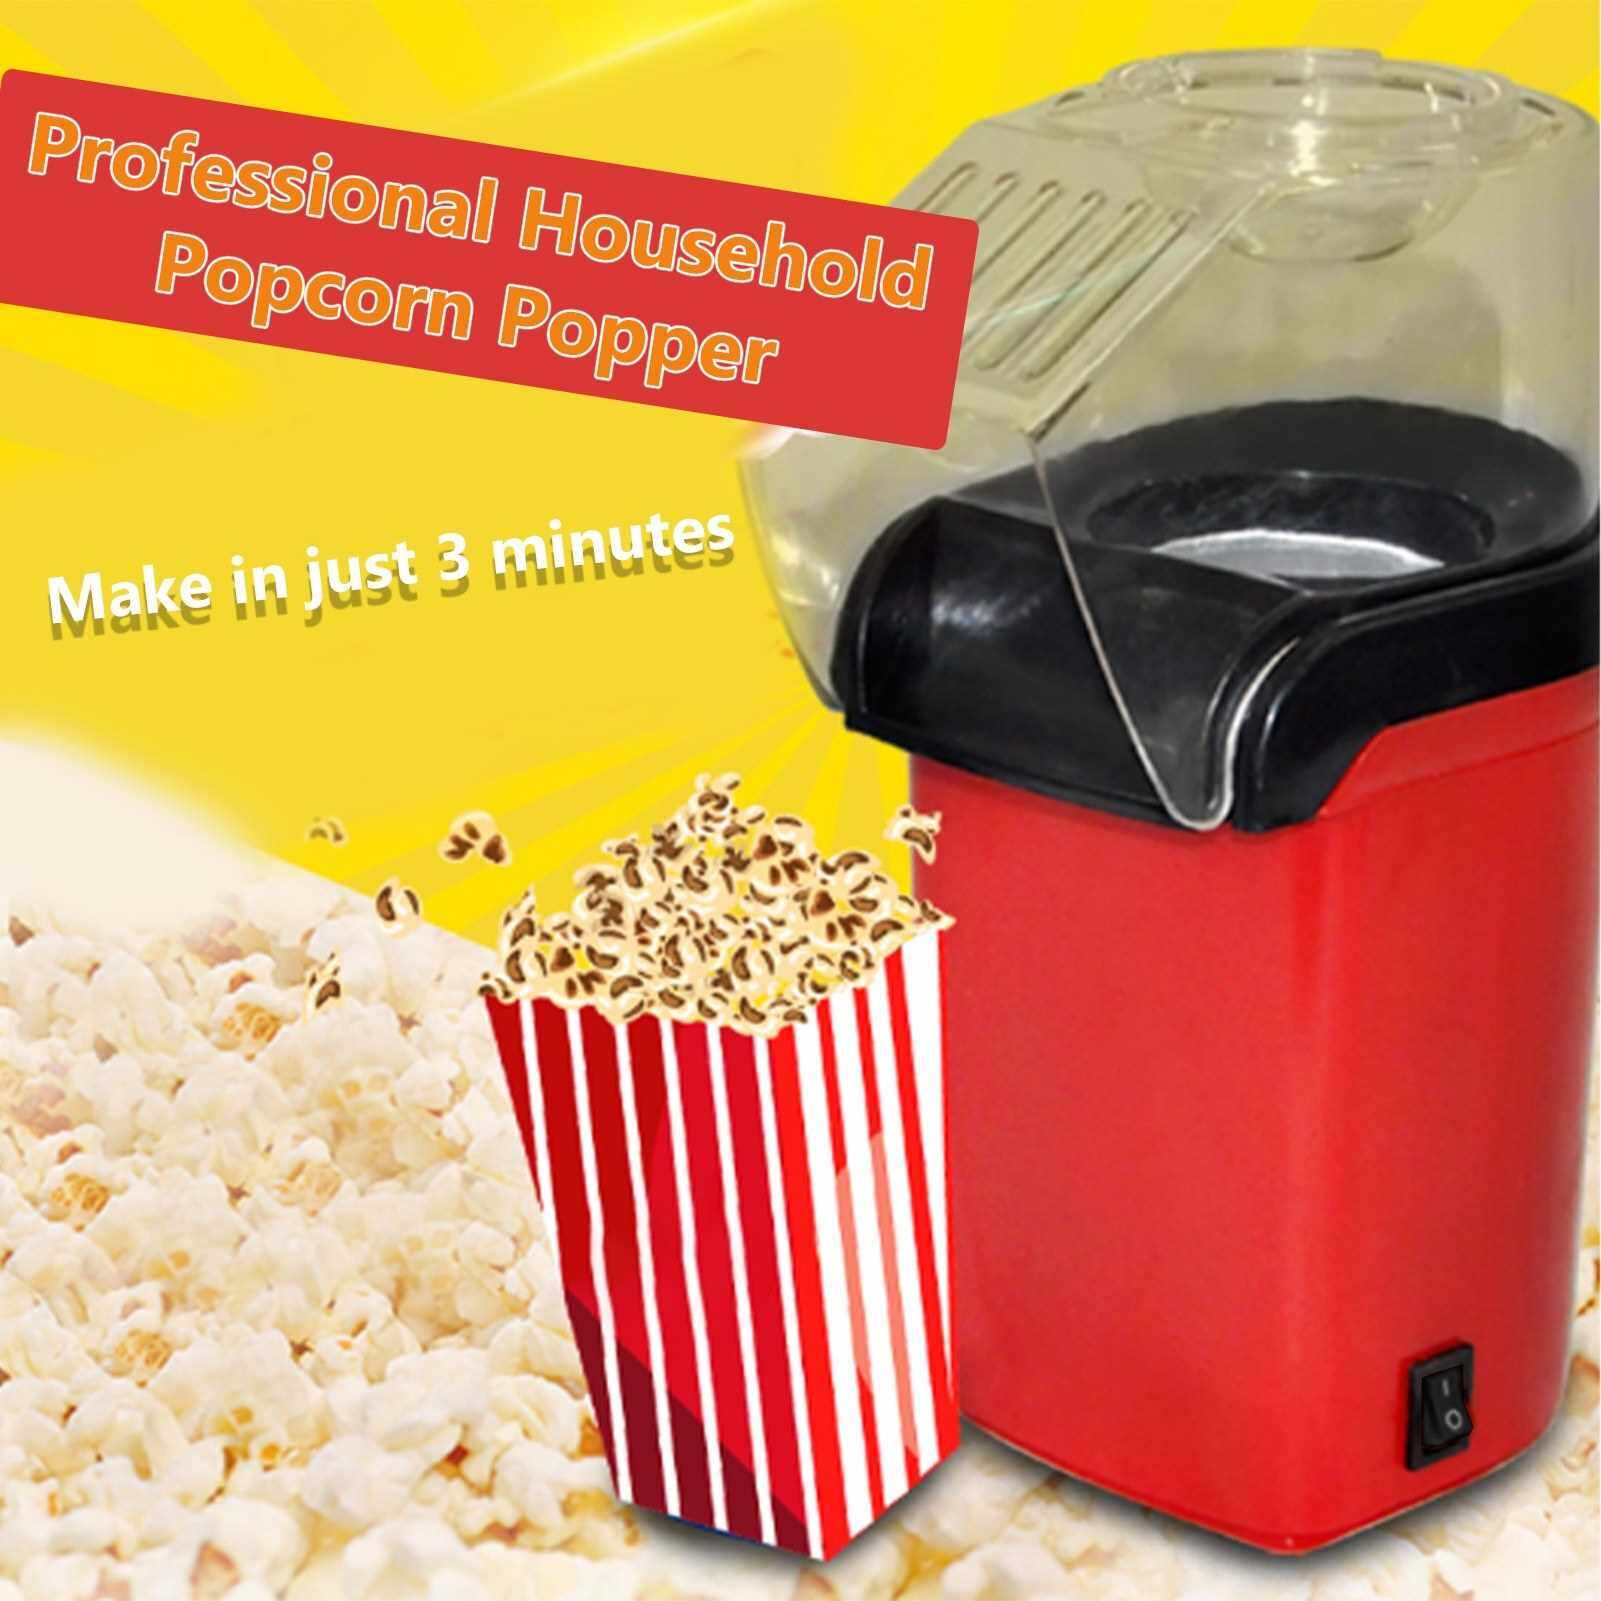 Best Selling 1200W Popcorn Popper Popcorn Maker Electric Popcorn Machine No Oil Needed for Home Family Kids (Red)